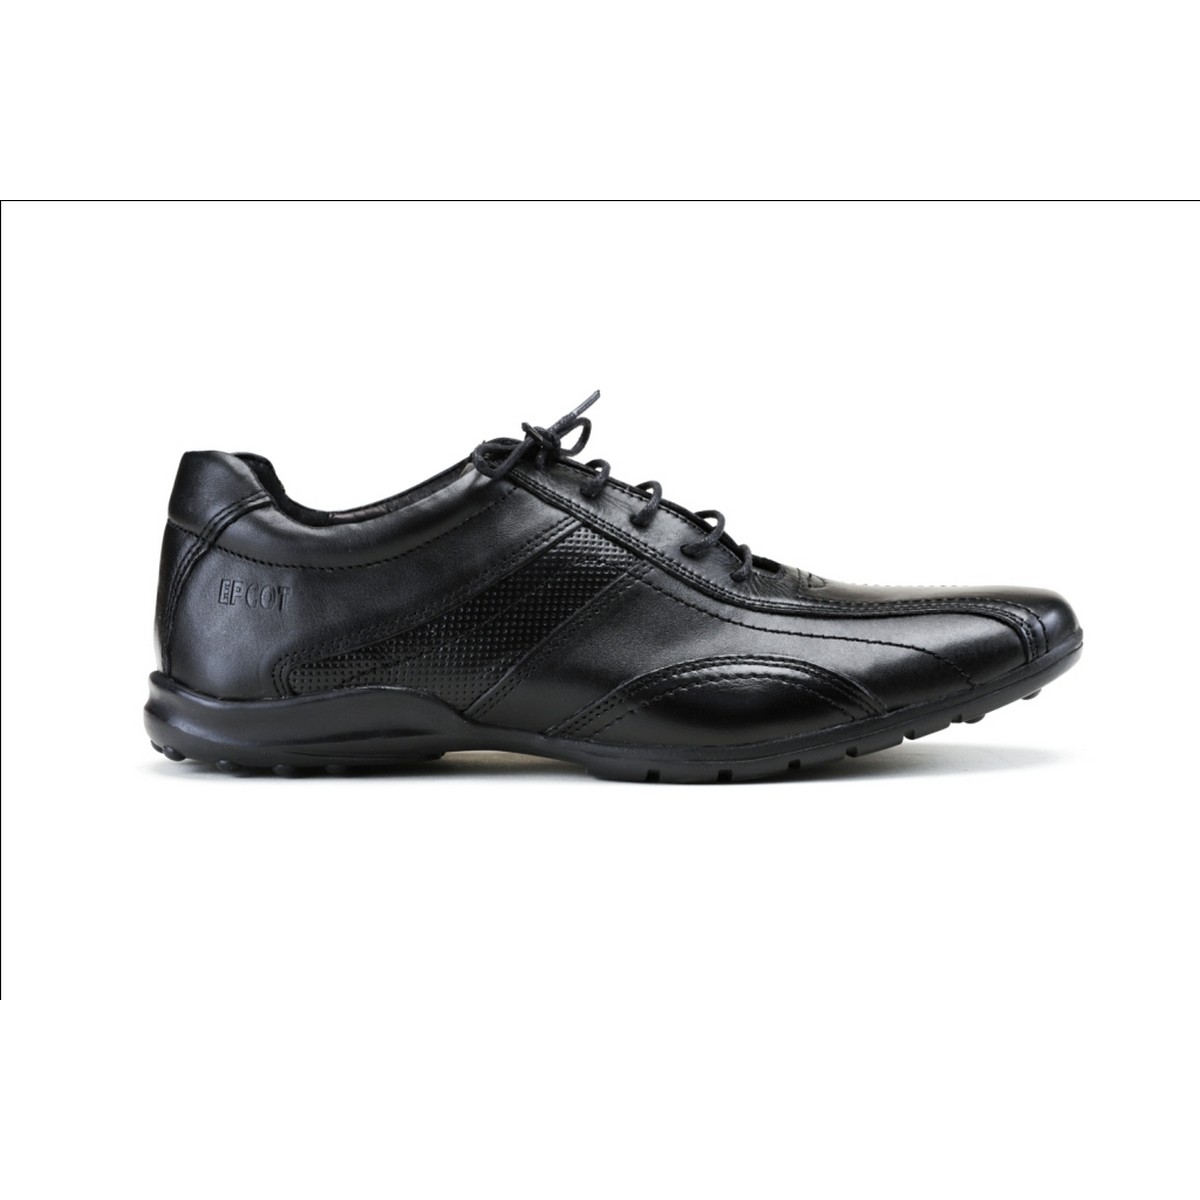 Epcot Black Leather Sneakers Shoes For Men - Drm 06 Black